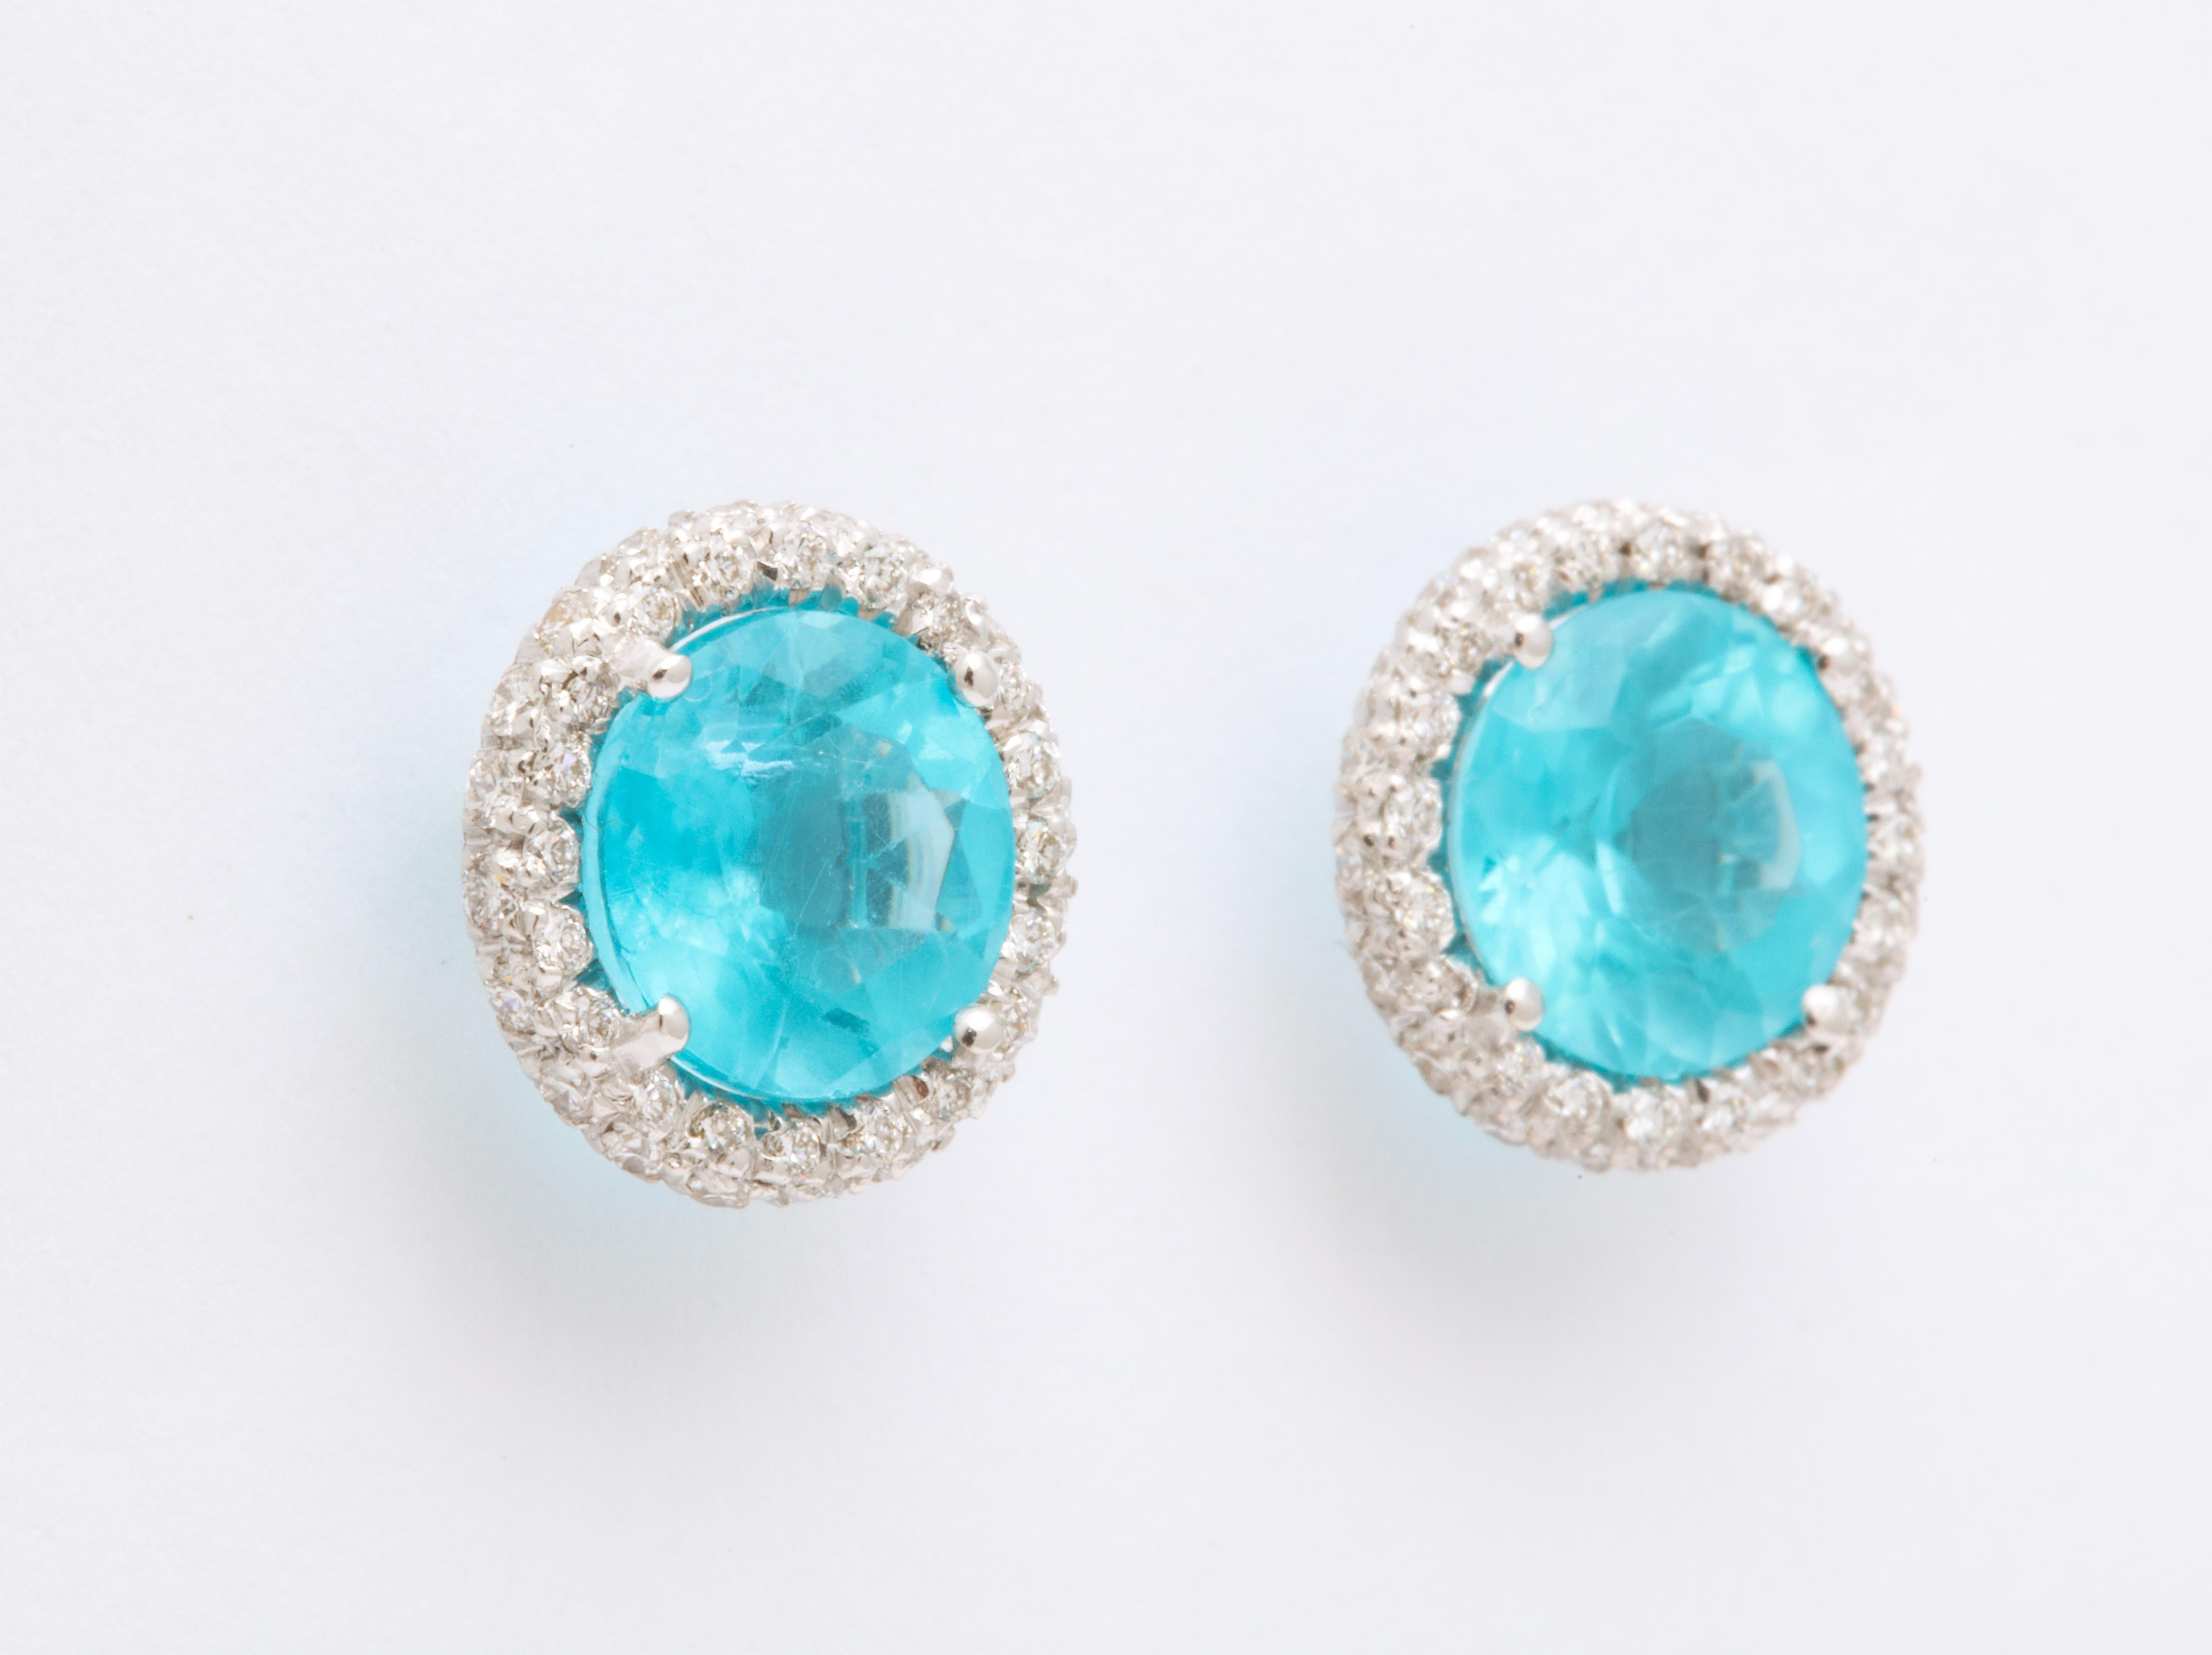 Bright blue apatite are surrounded by micro pave set diamonds to create these unique stud earrings.  Easily wearable, bold and unique, these are destined to become someone's go to earrings for years to come.
For pierced ears with extra large backs